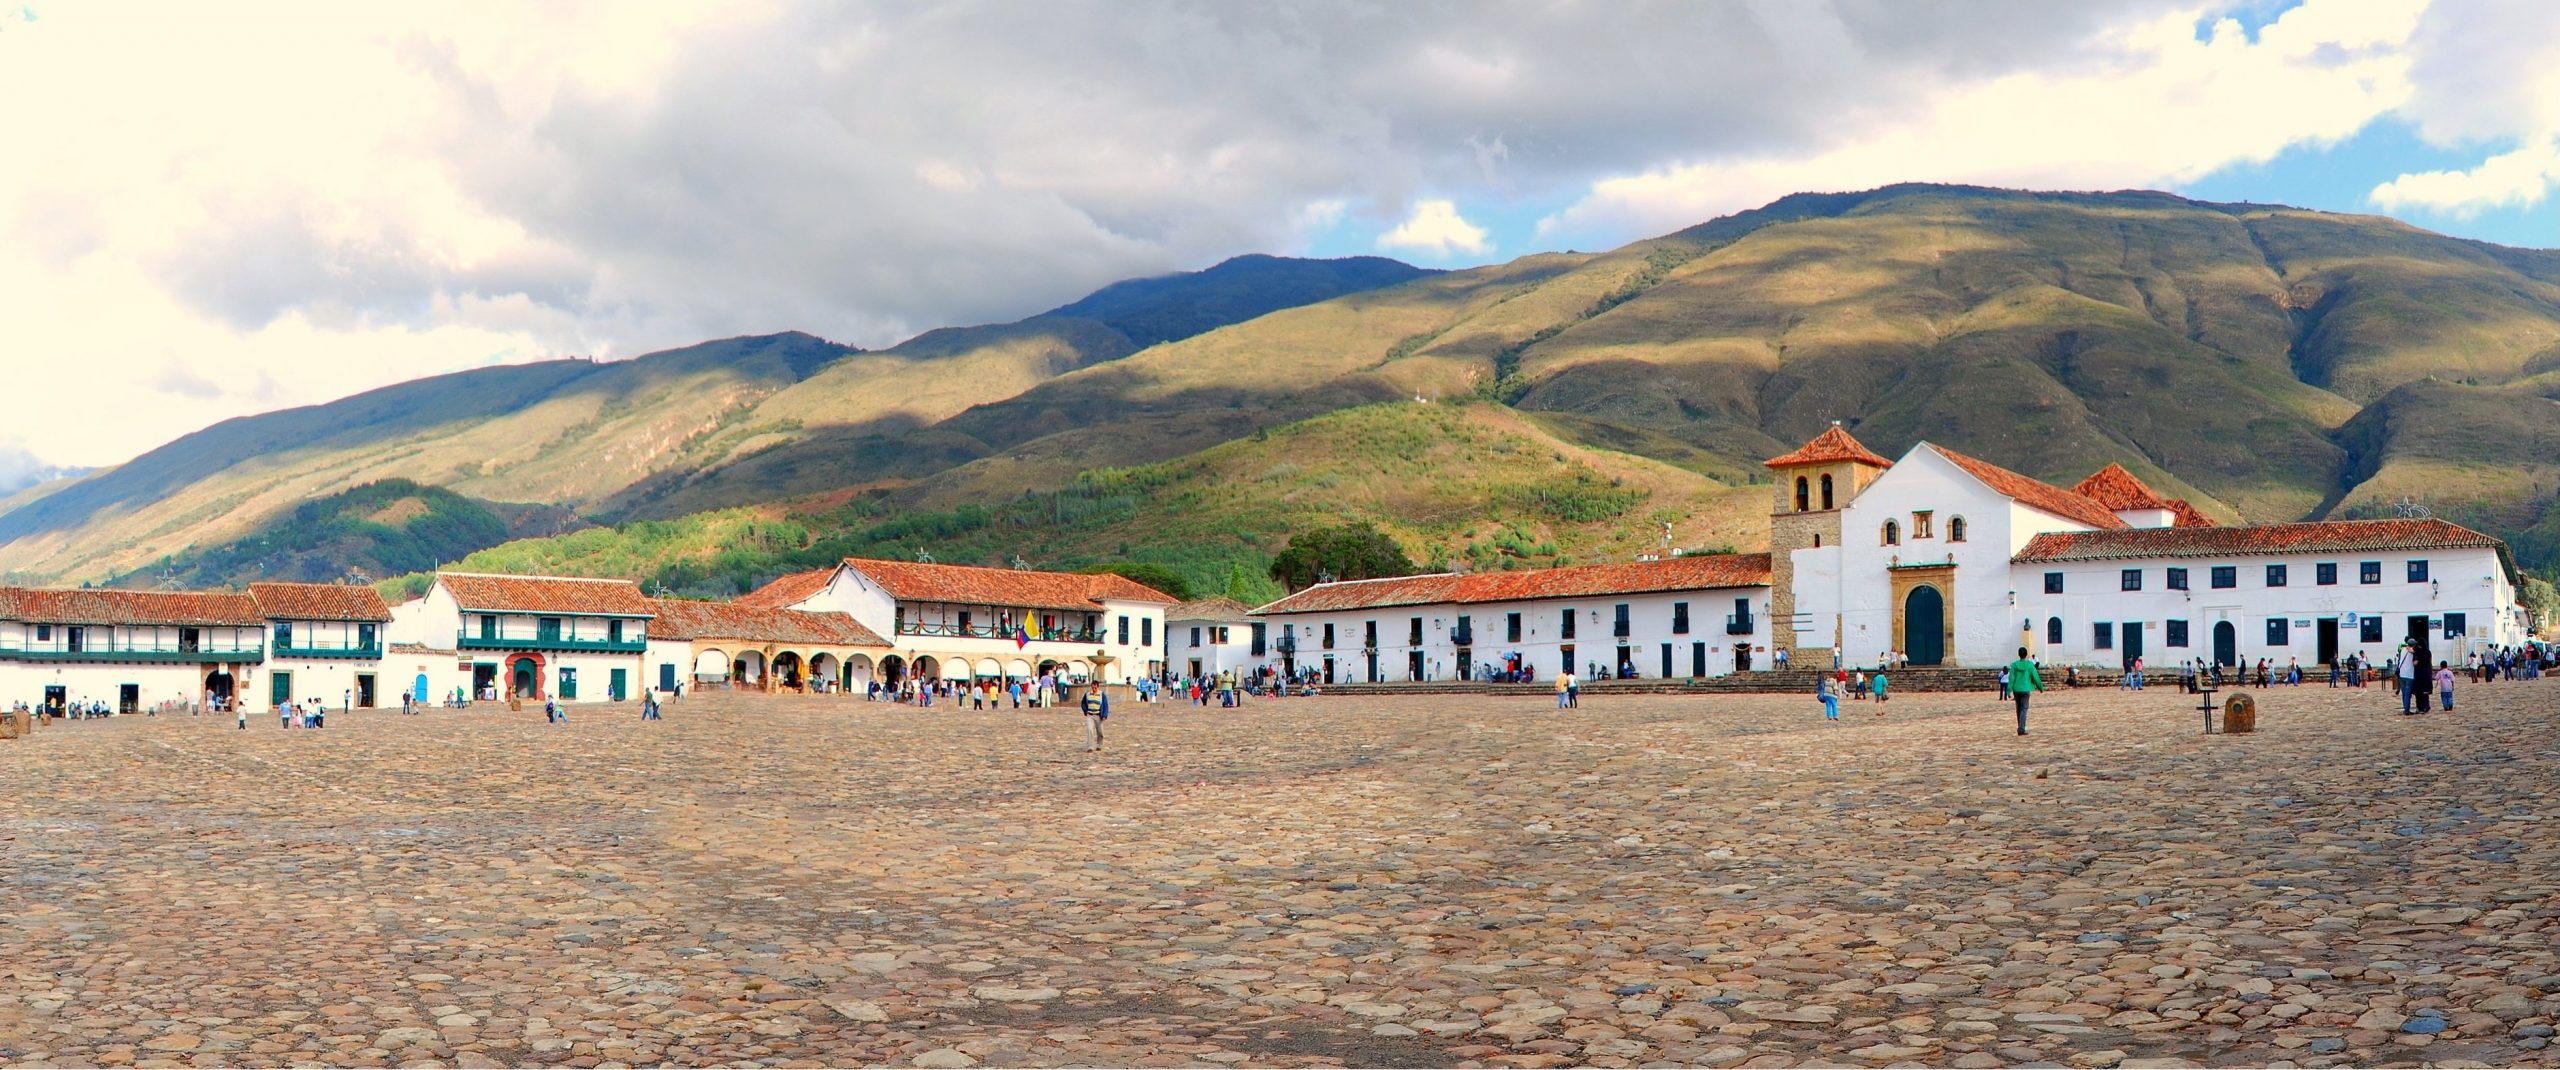 The main square of Villa de Leyva, one of the biggest colonial square in South America, with Nuestra Señora del Rosario church on the right hand side and the beautiful mountains in the background.